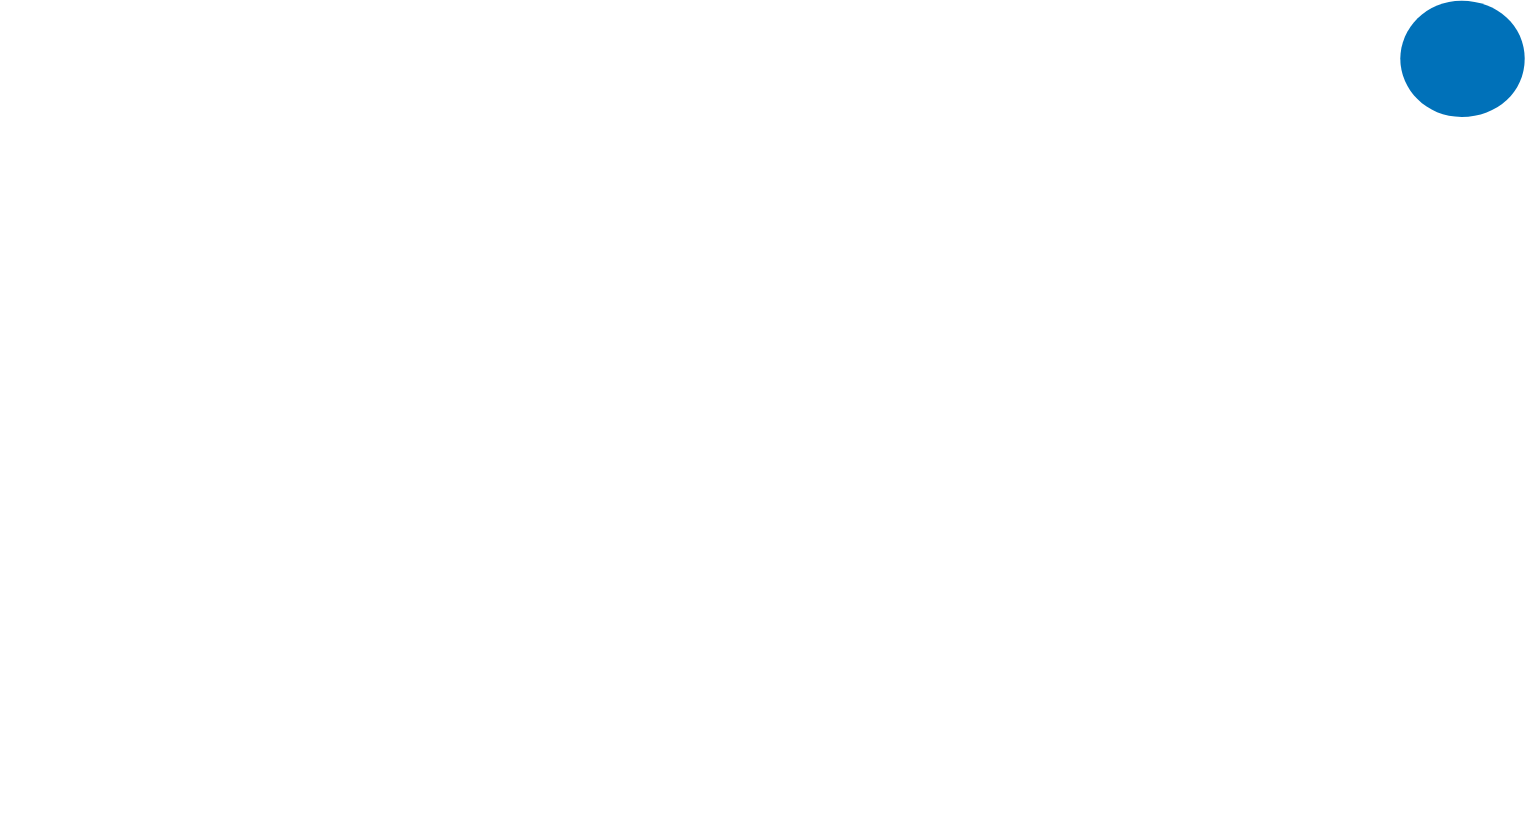 Computer Programs and Systems logo pour fonds sombres (PNG transparent)